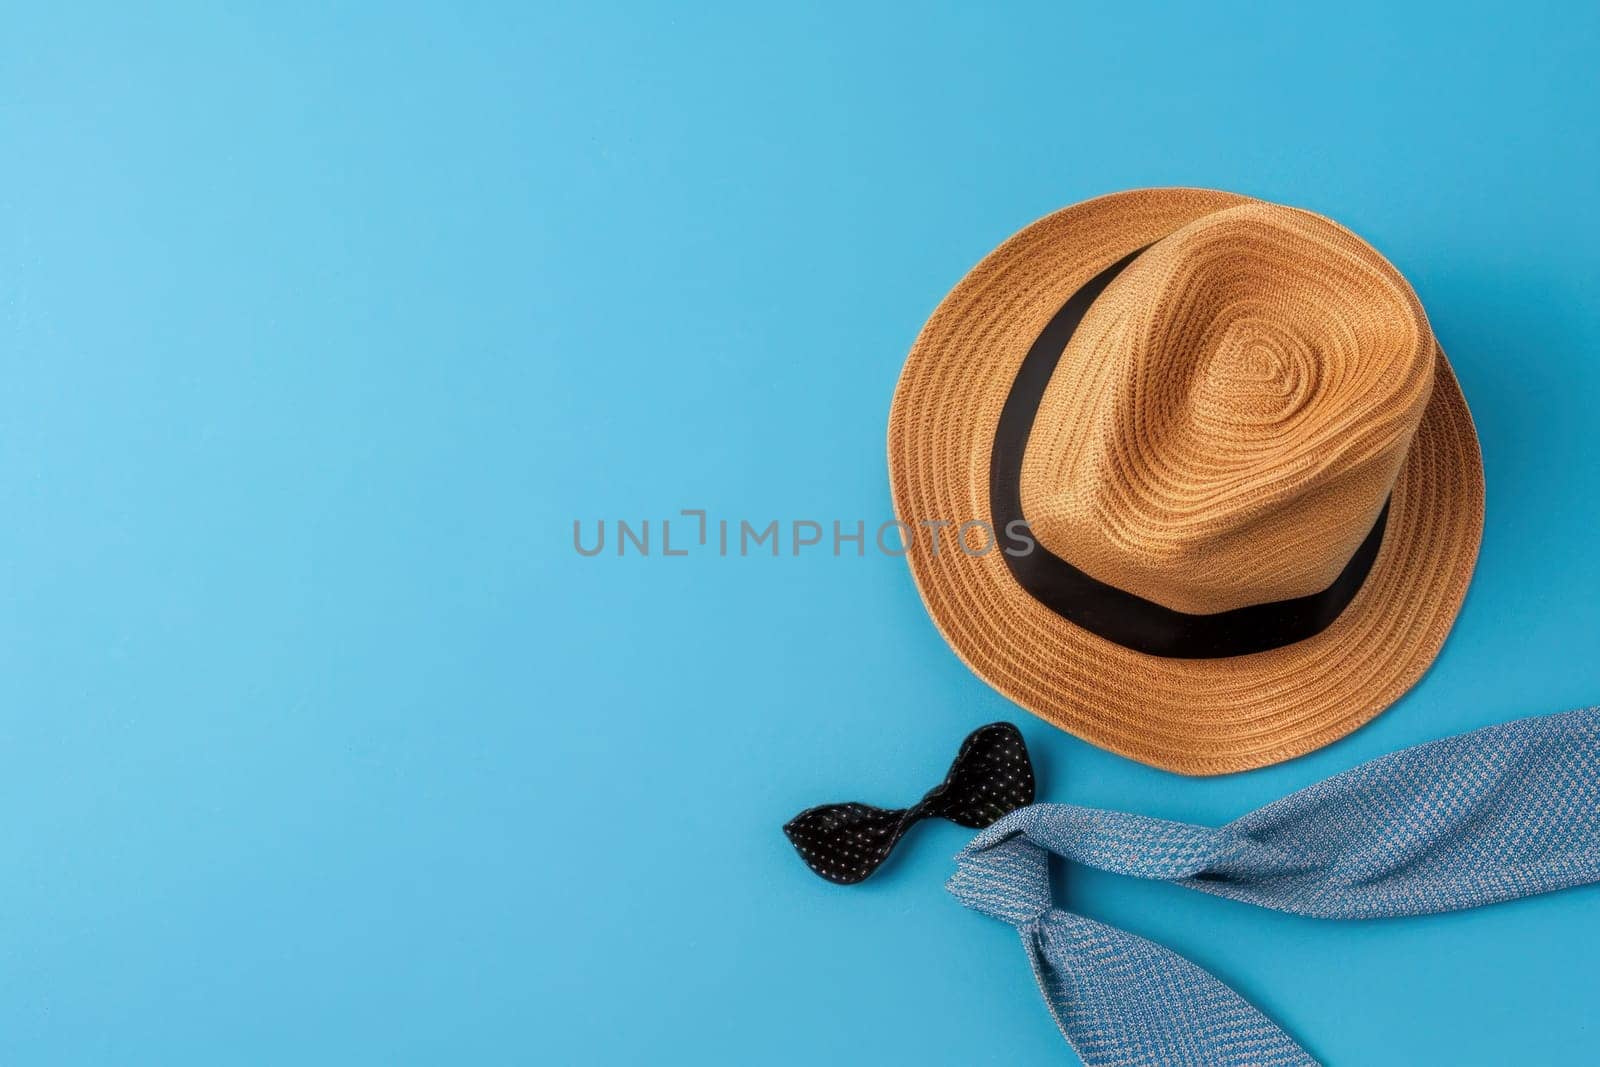 Elegant accessories for a stylish business look on blue background with copy space for text